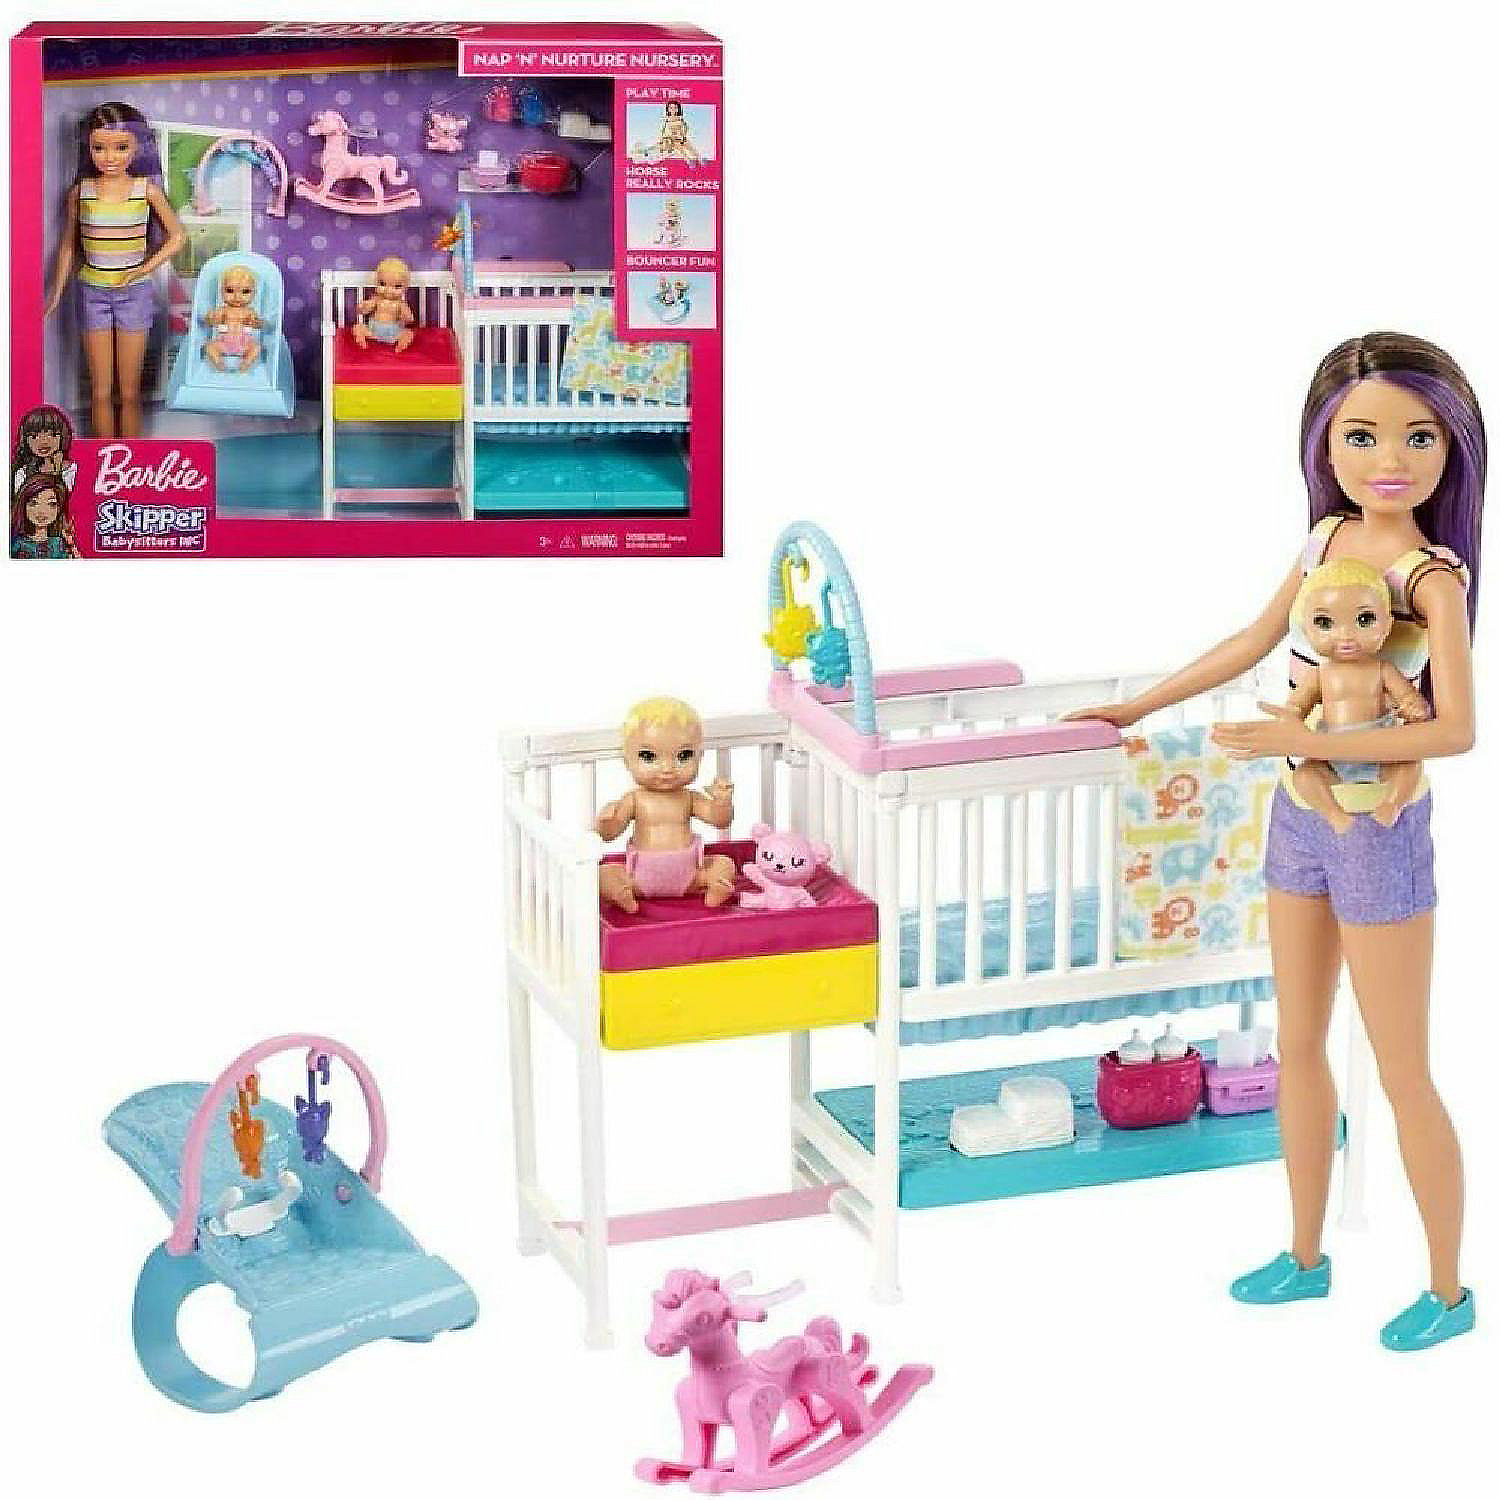 Schema Jane Austen steeg Barbie™ Nursery Playset with Skipper Babysitters Doll, 2 Baby Dolls, Crib  and 10+ Pieces of Working Baby Gear and Themed Toys, | Oriental Trading